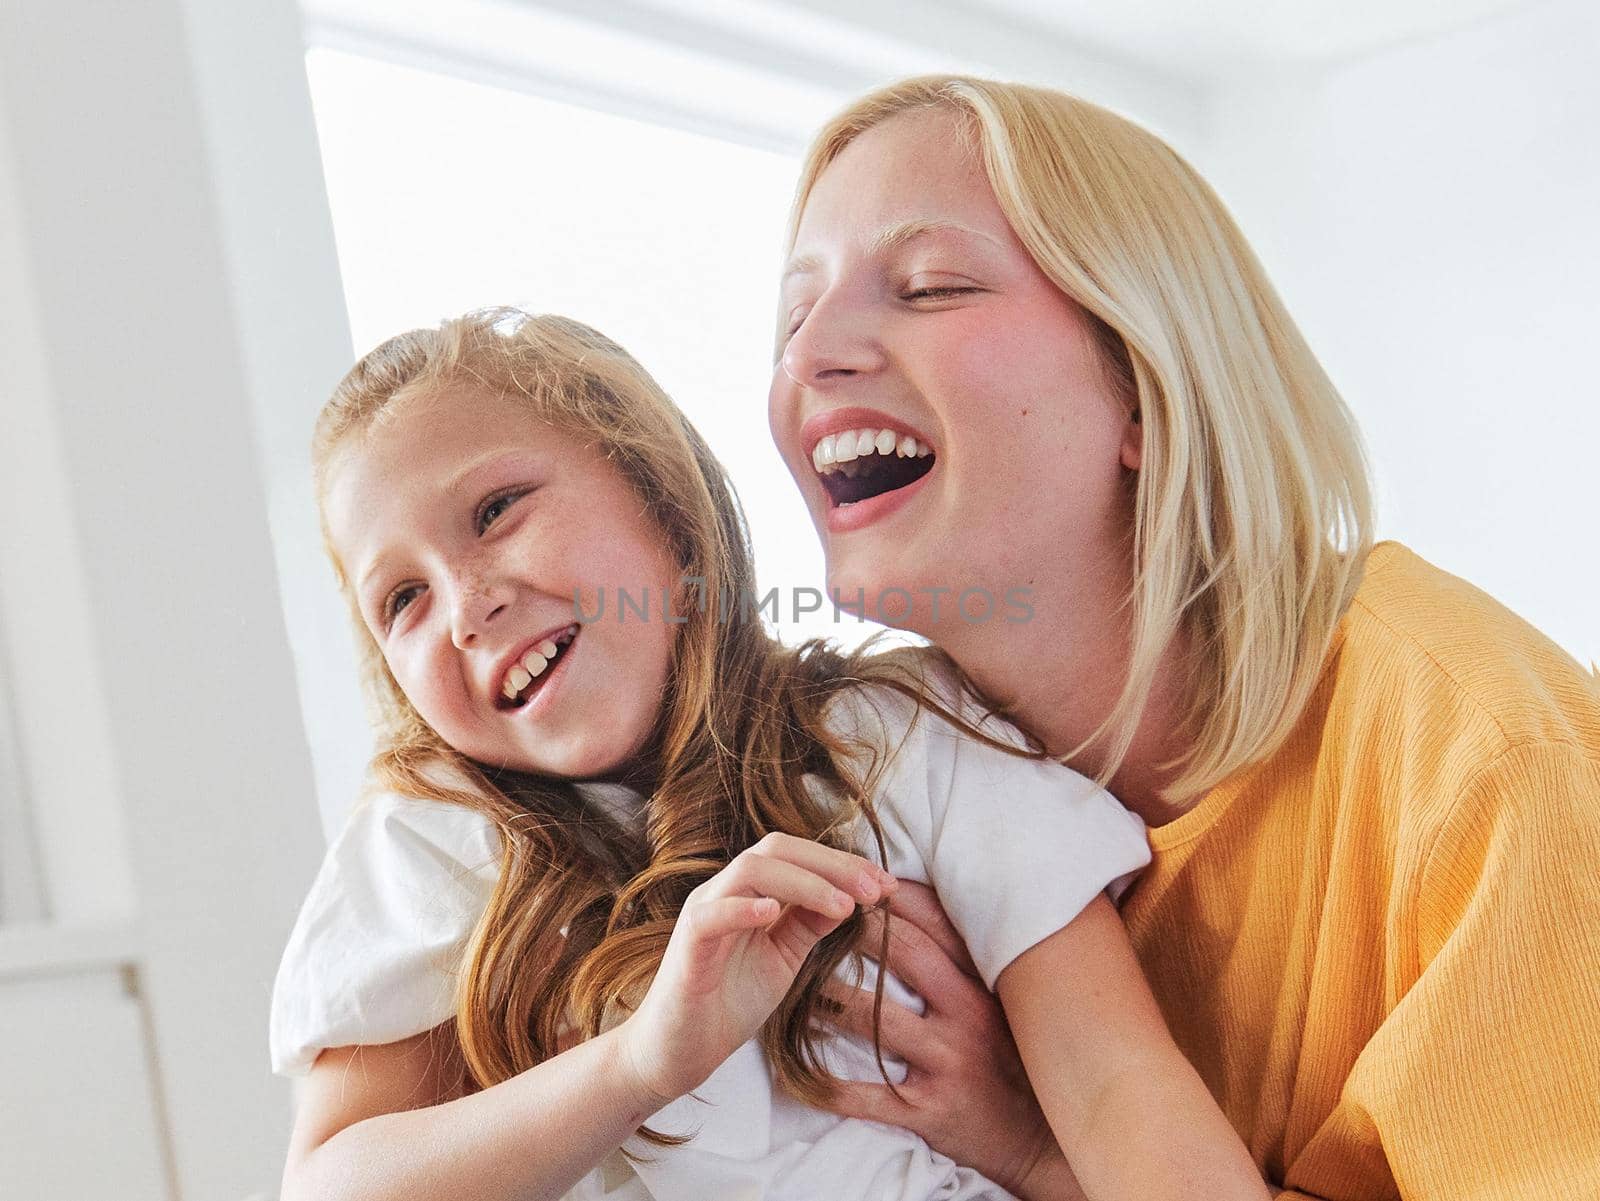 child sister fun family girl together childhood female happy daughter young lifestyle home indoor happiness kid togetherness mother woman by Picsfive